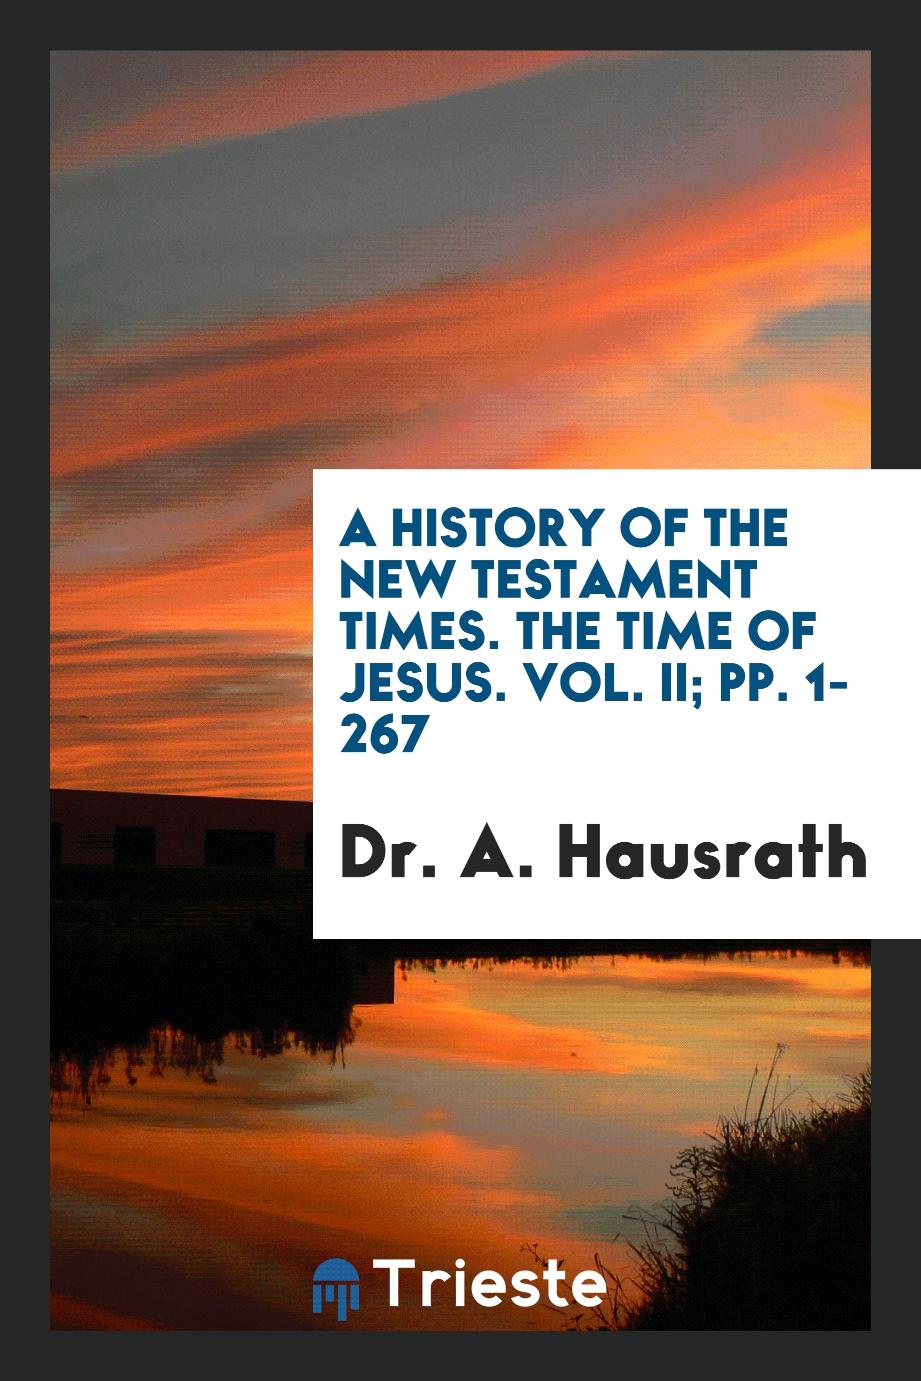 A History of the New Testament Times. The Time of Jesus. Vol. II; pp. 1-267